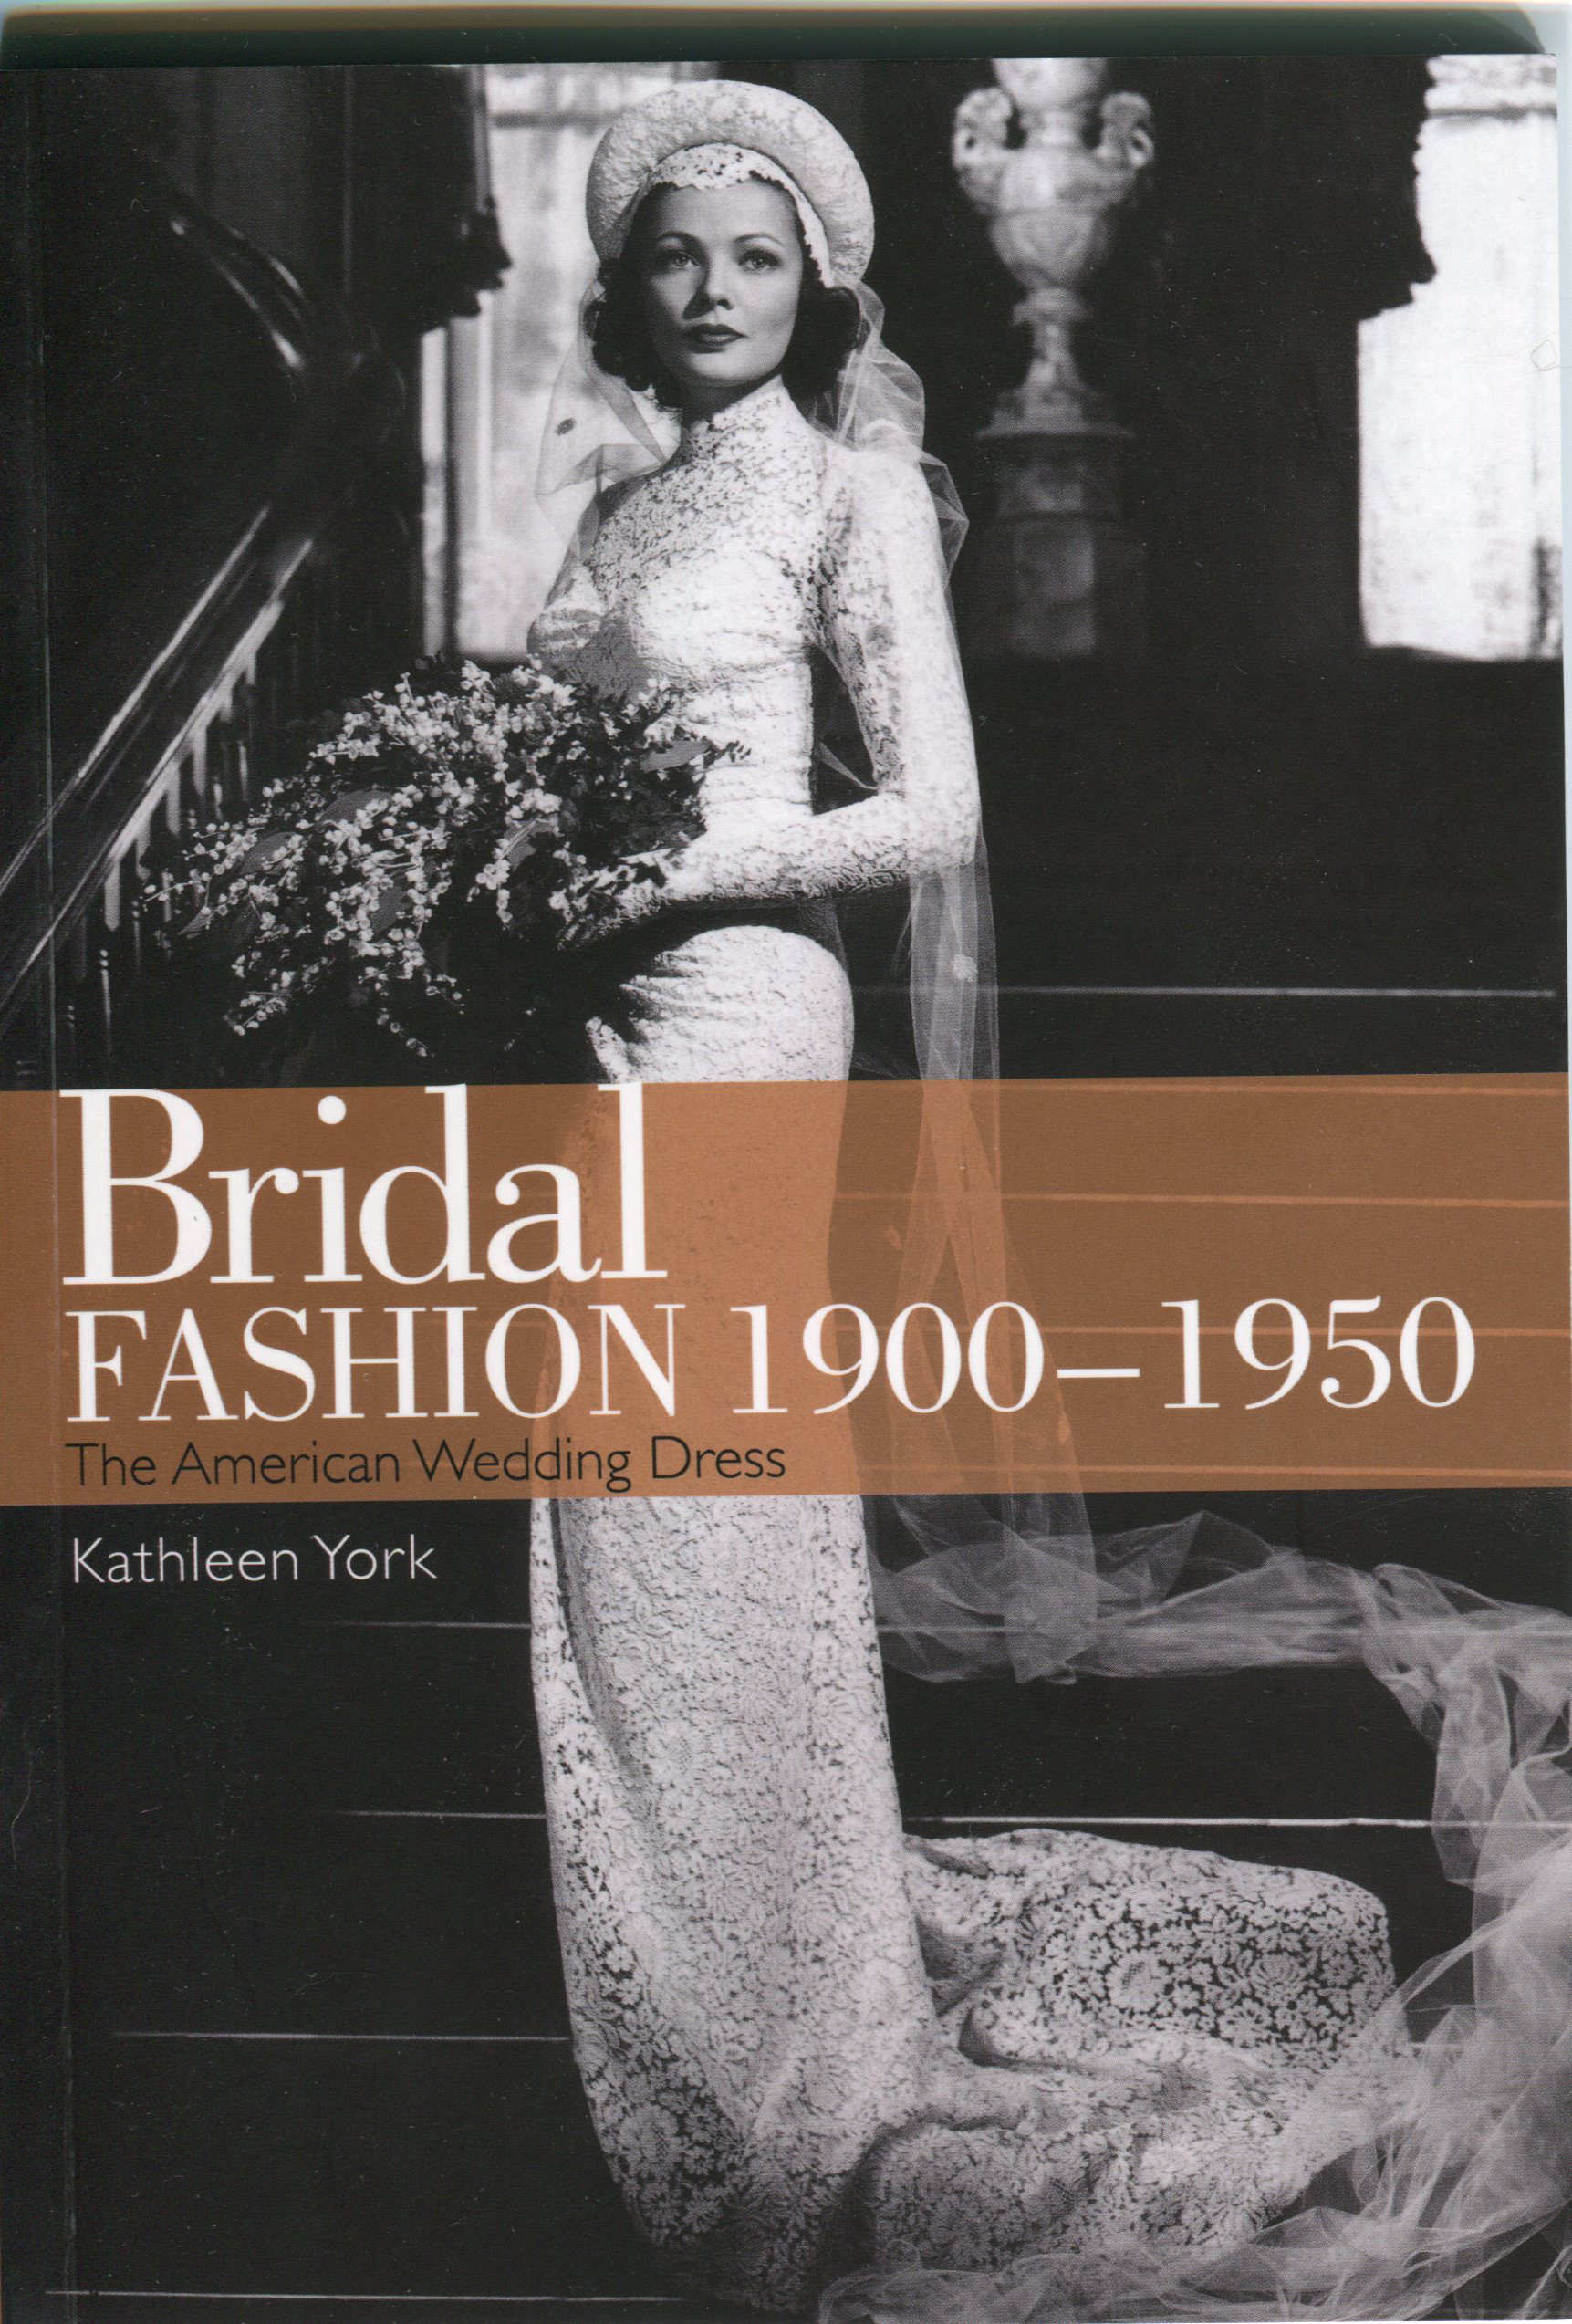 Book cover of Bridal Fashions 1900-1950 by Kathleen York 